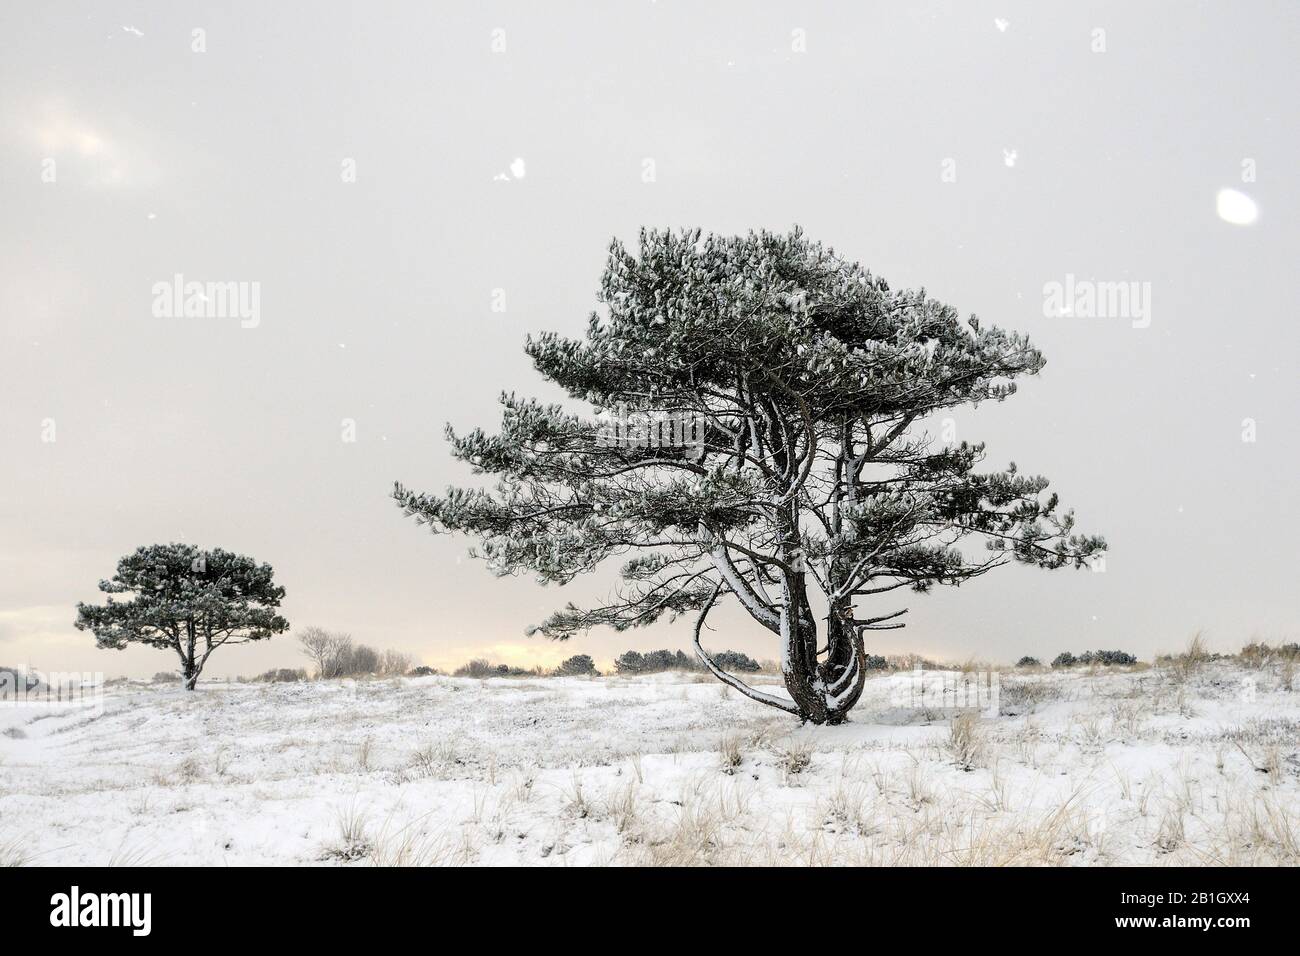 Scotch pine, Scots pine (Pinus sylvestris), snowfall in the Dunes with pine trees, Netherlands, Den Helder Stock Photo